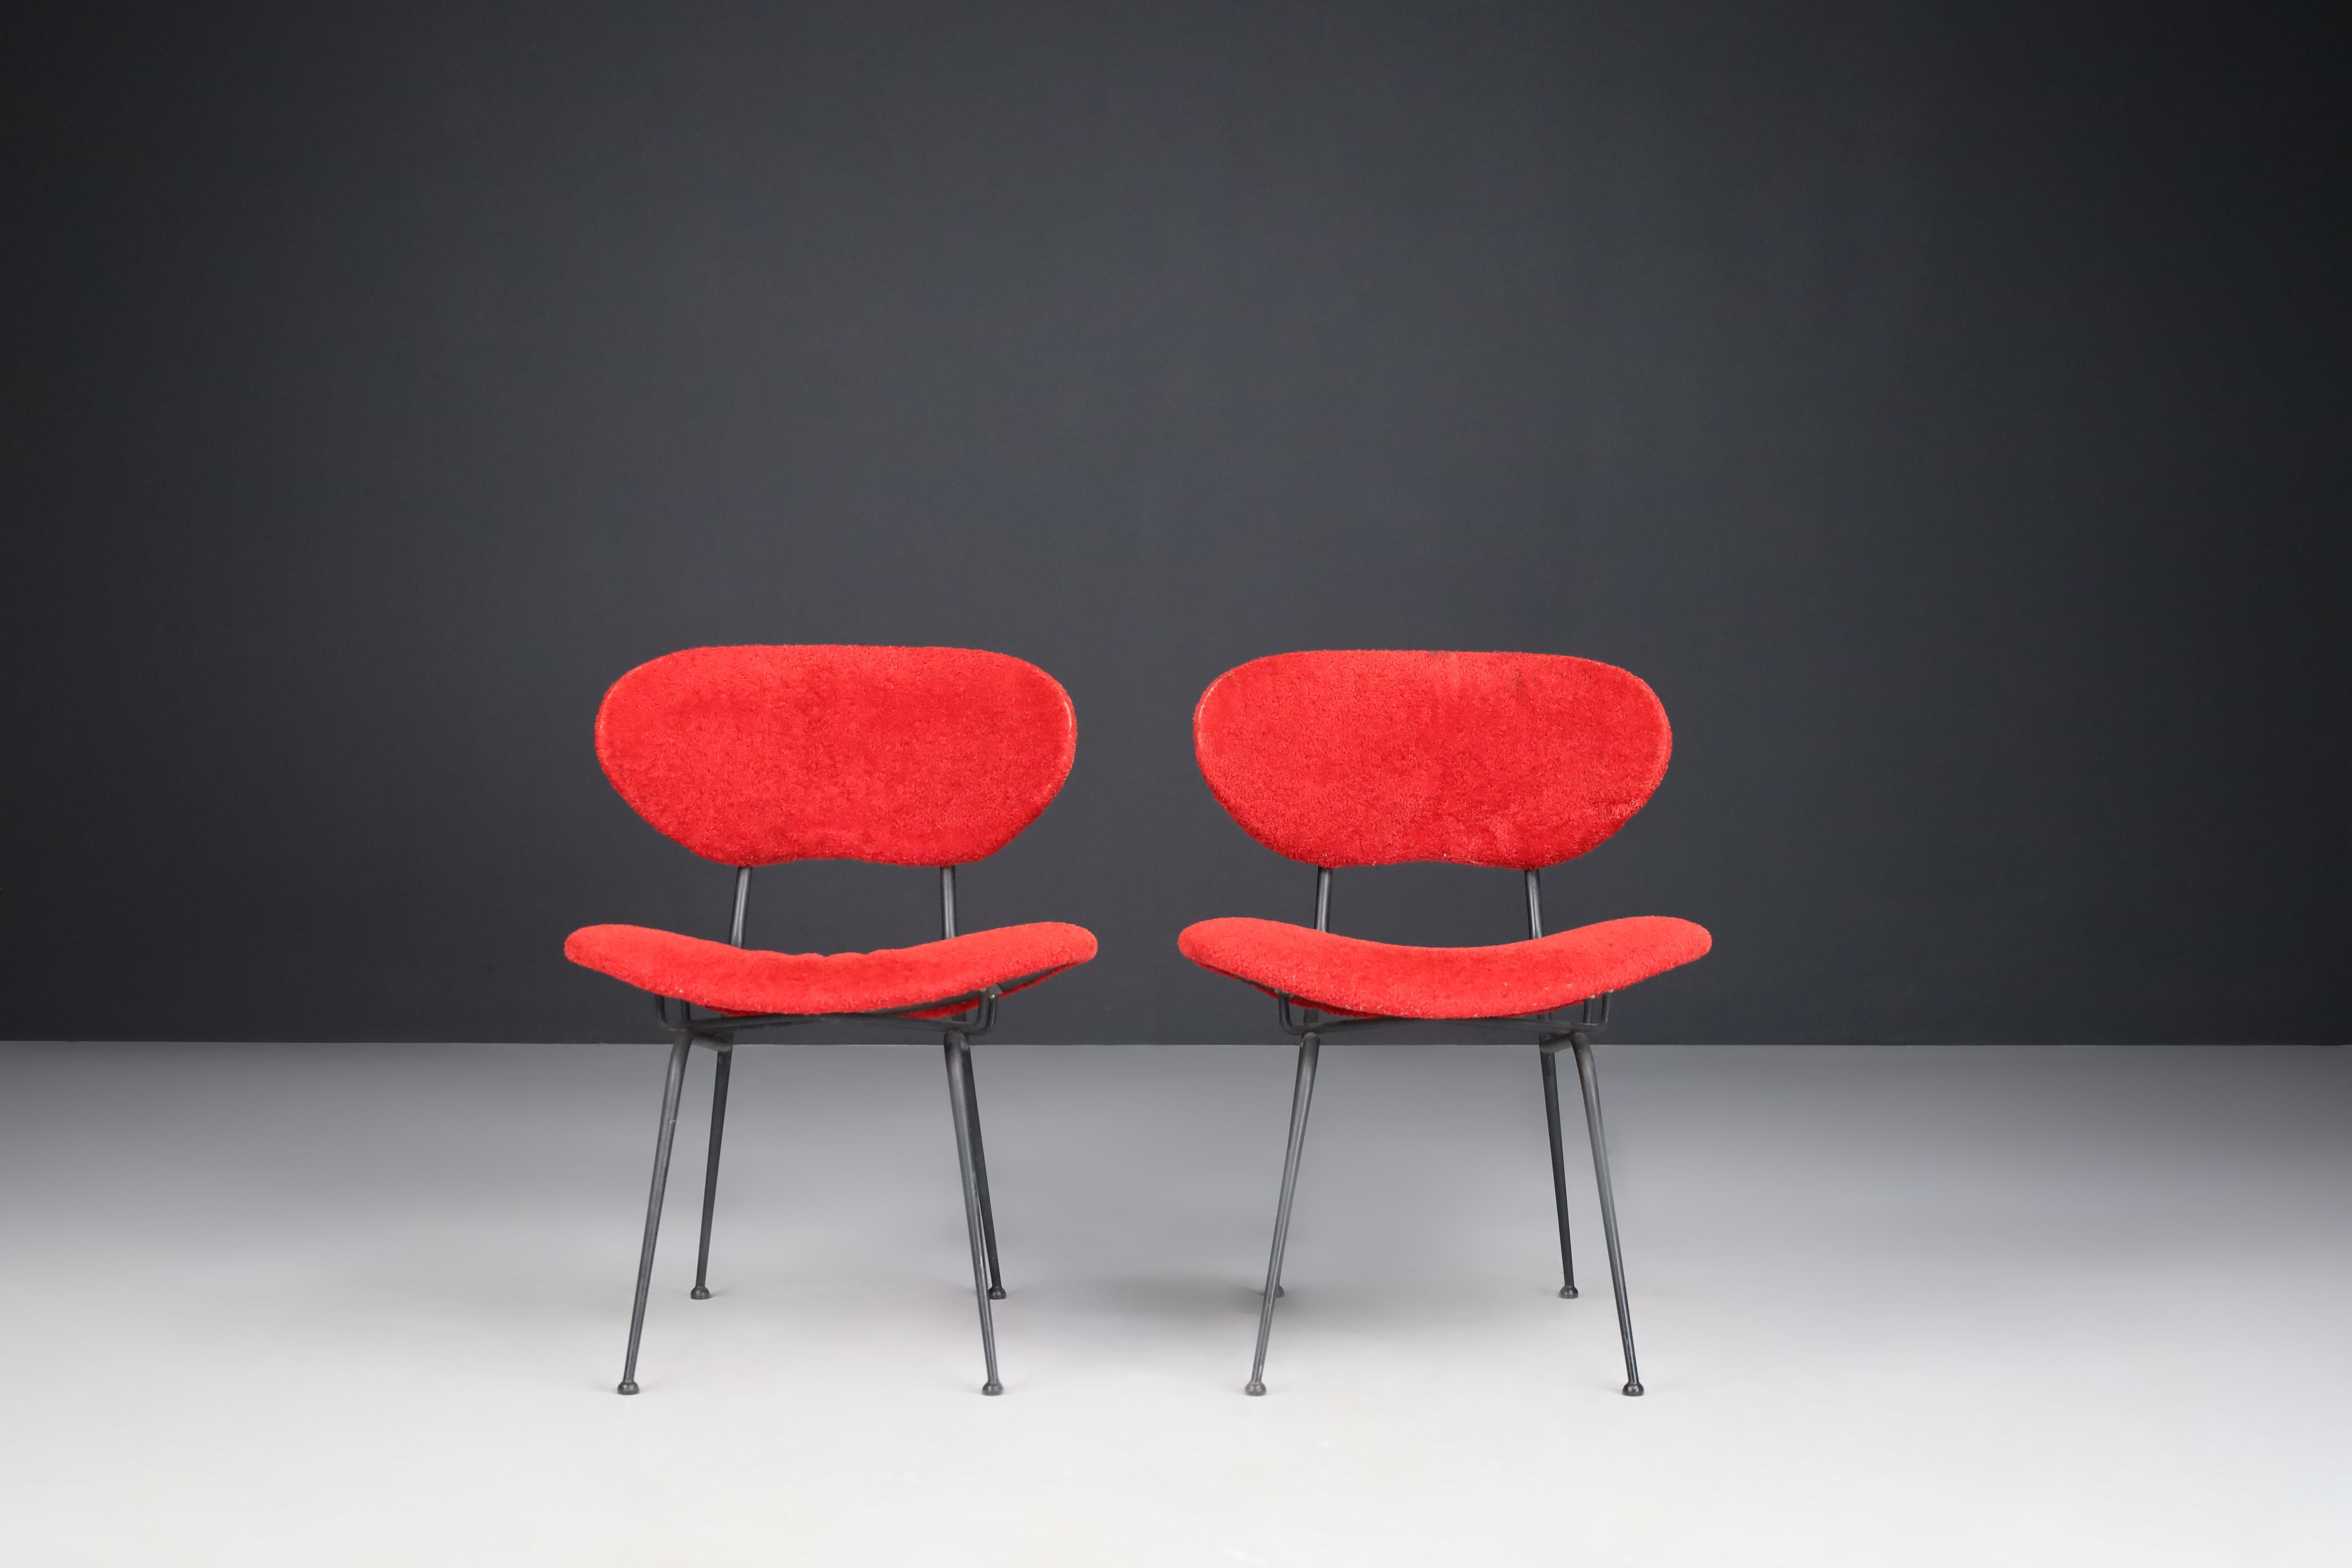 Red Mid-Century Modern armchairs by Gastone Rinaldi, Italy 1960s.
 
Gastone Rinaldi designed this beautiful and iconic pair of rare chairs in 1954, Italy. The shape of the chairs is sculptural, unique, and elegant. The legs of the chairs are very